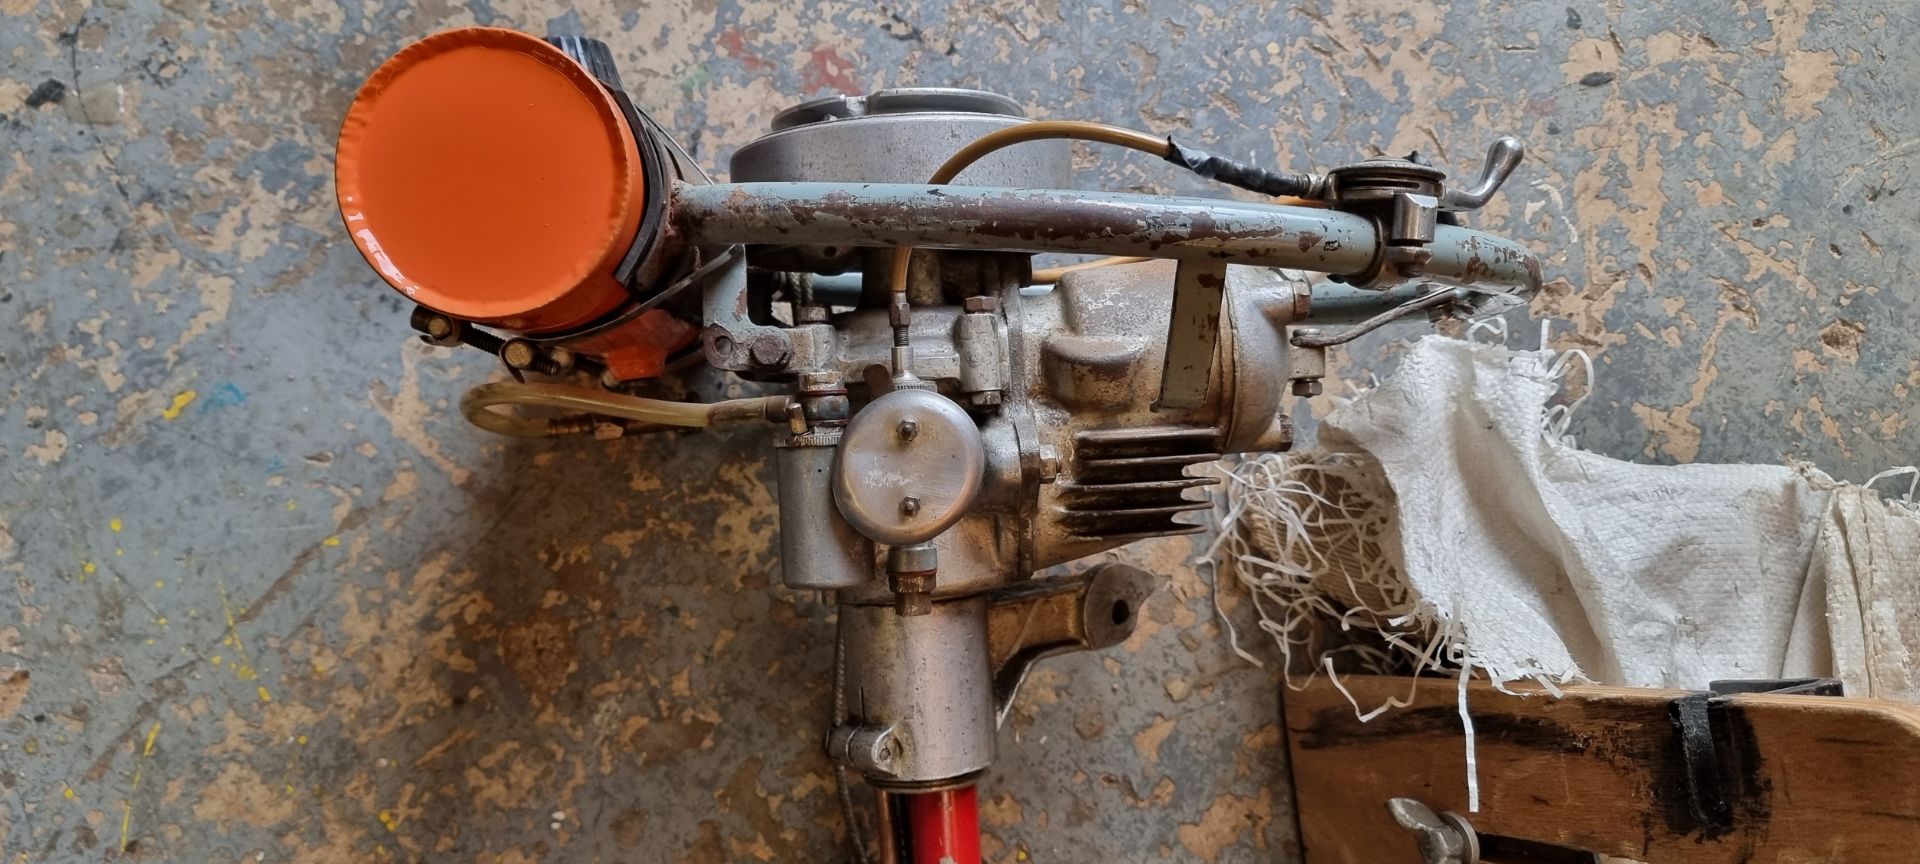 A British Anzani outboard motor, with mounting plate, working when last used. - Image 2 of 3